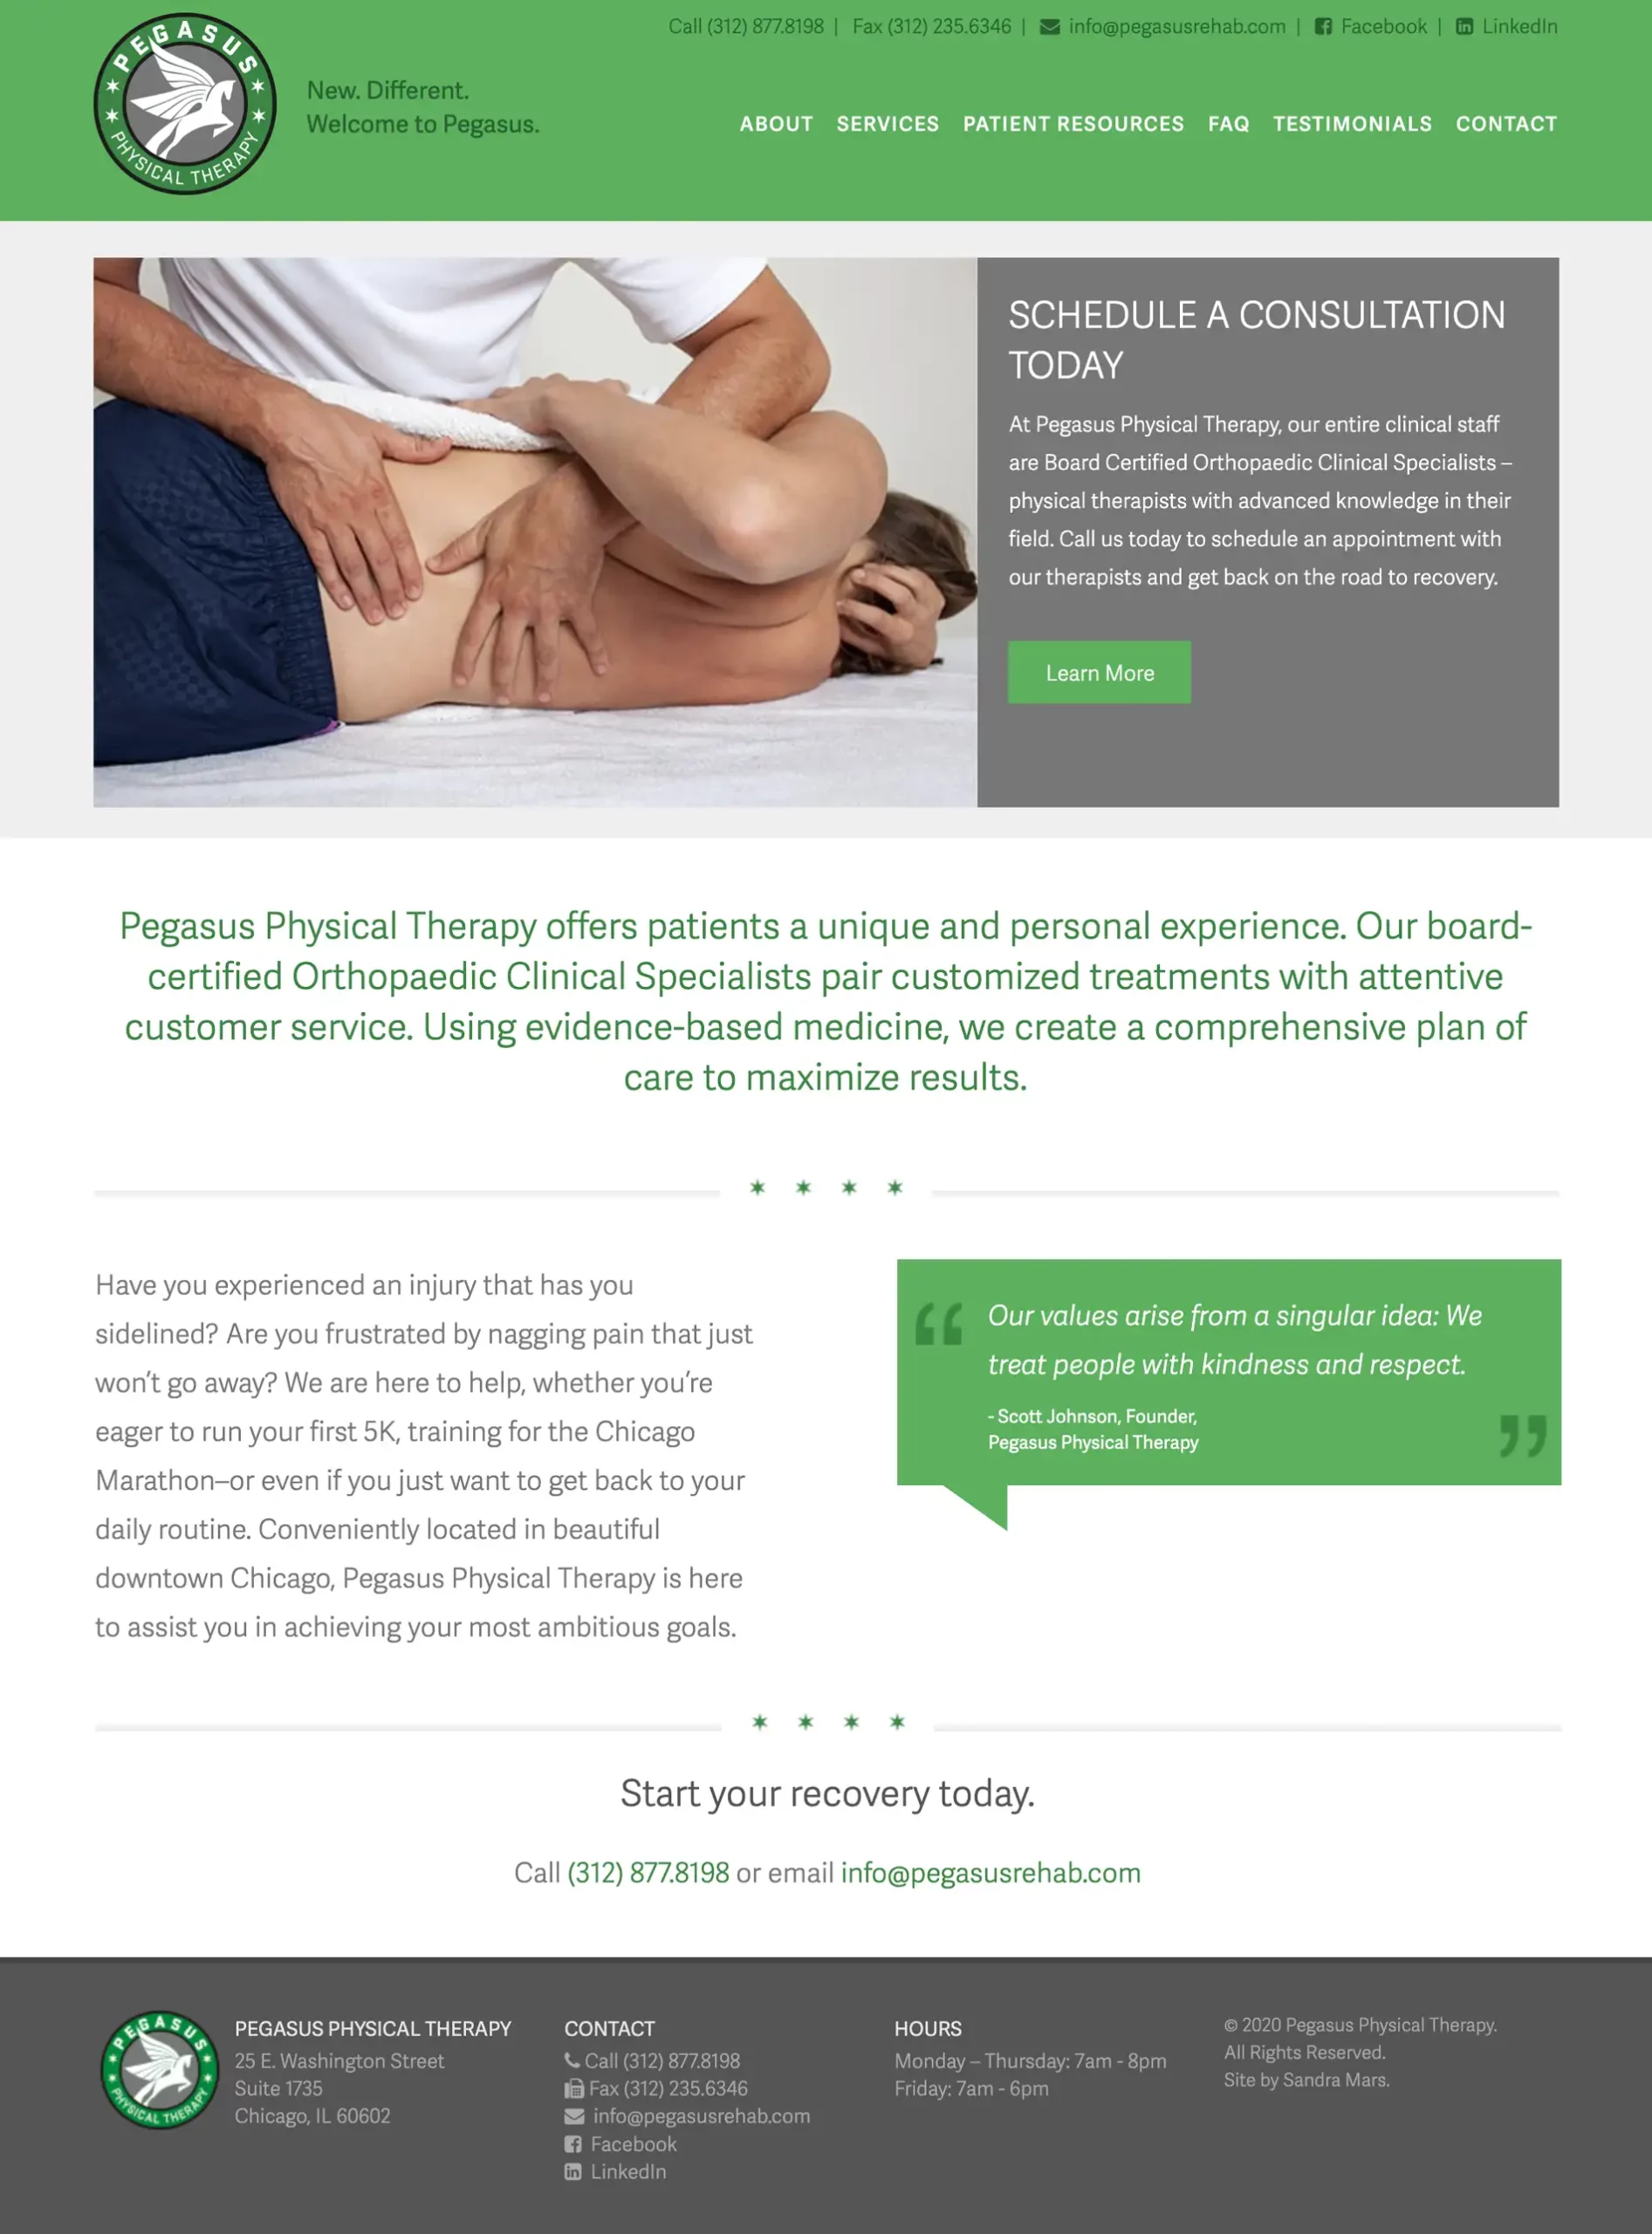 Pegasus Physical Therapy homepage image